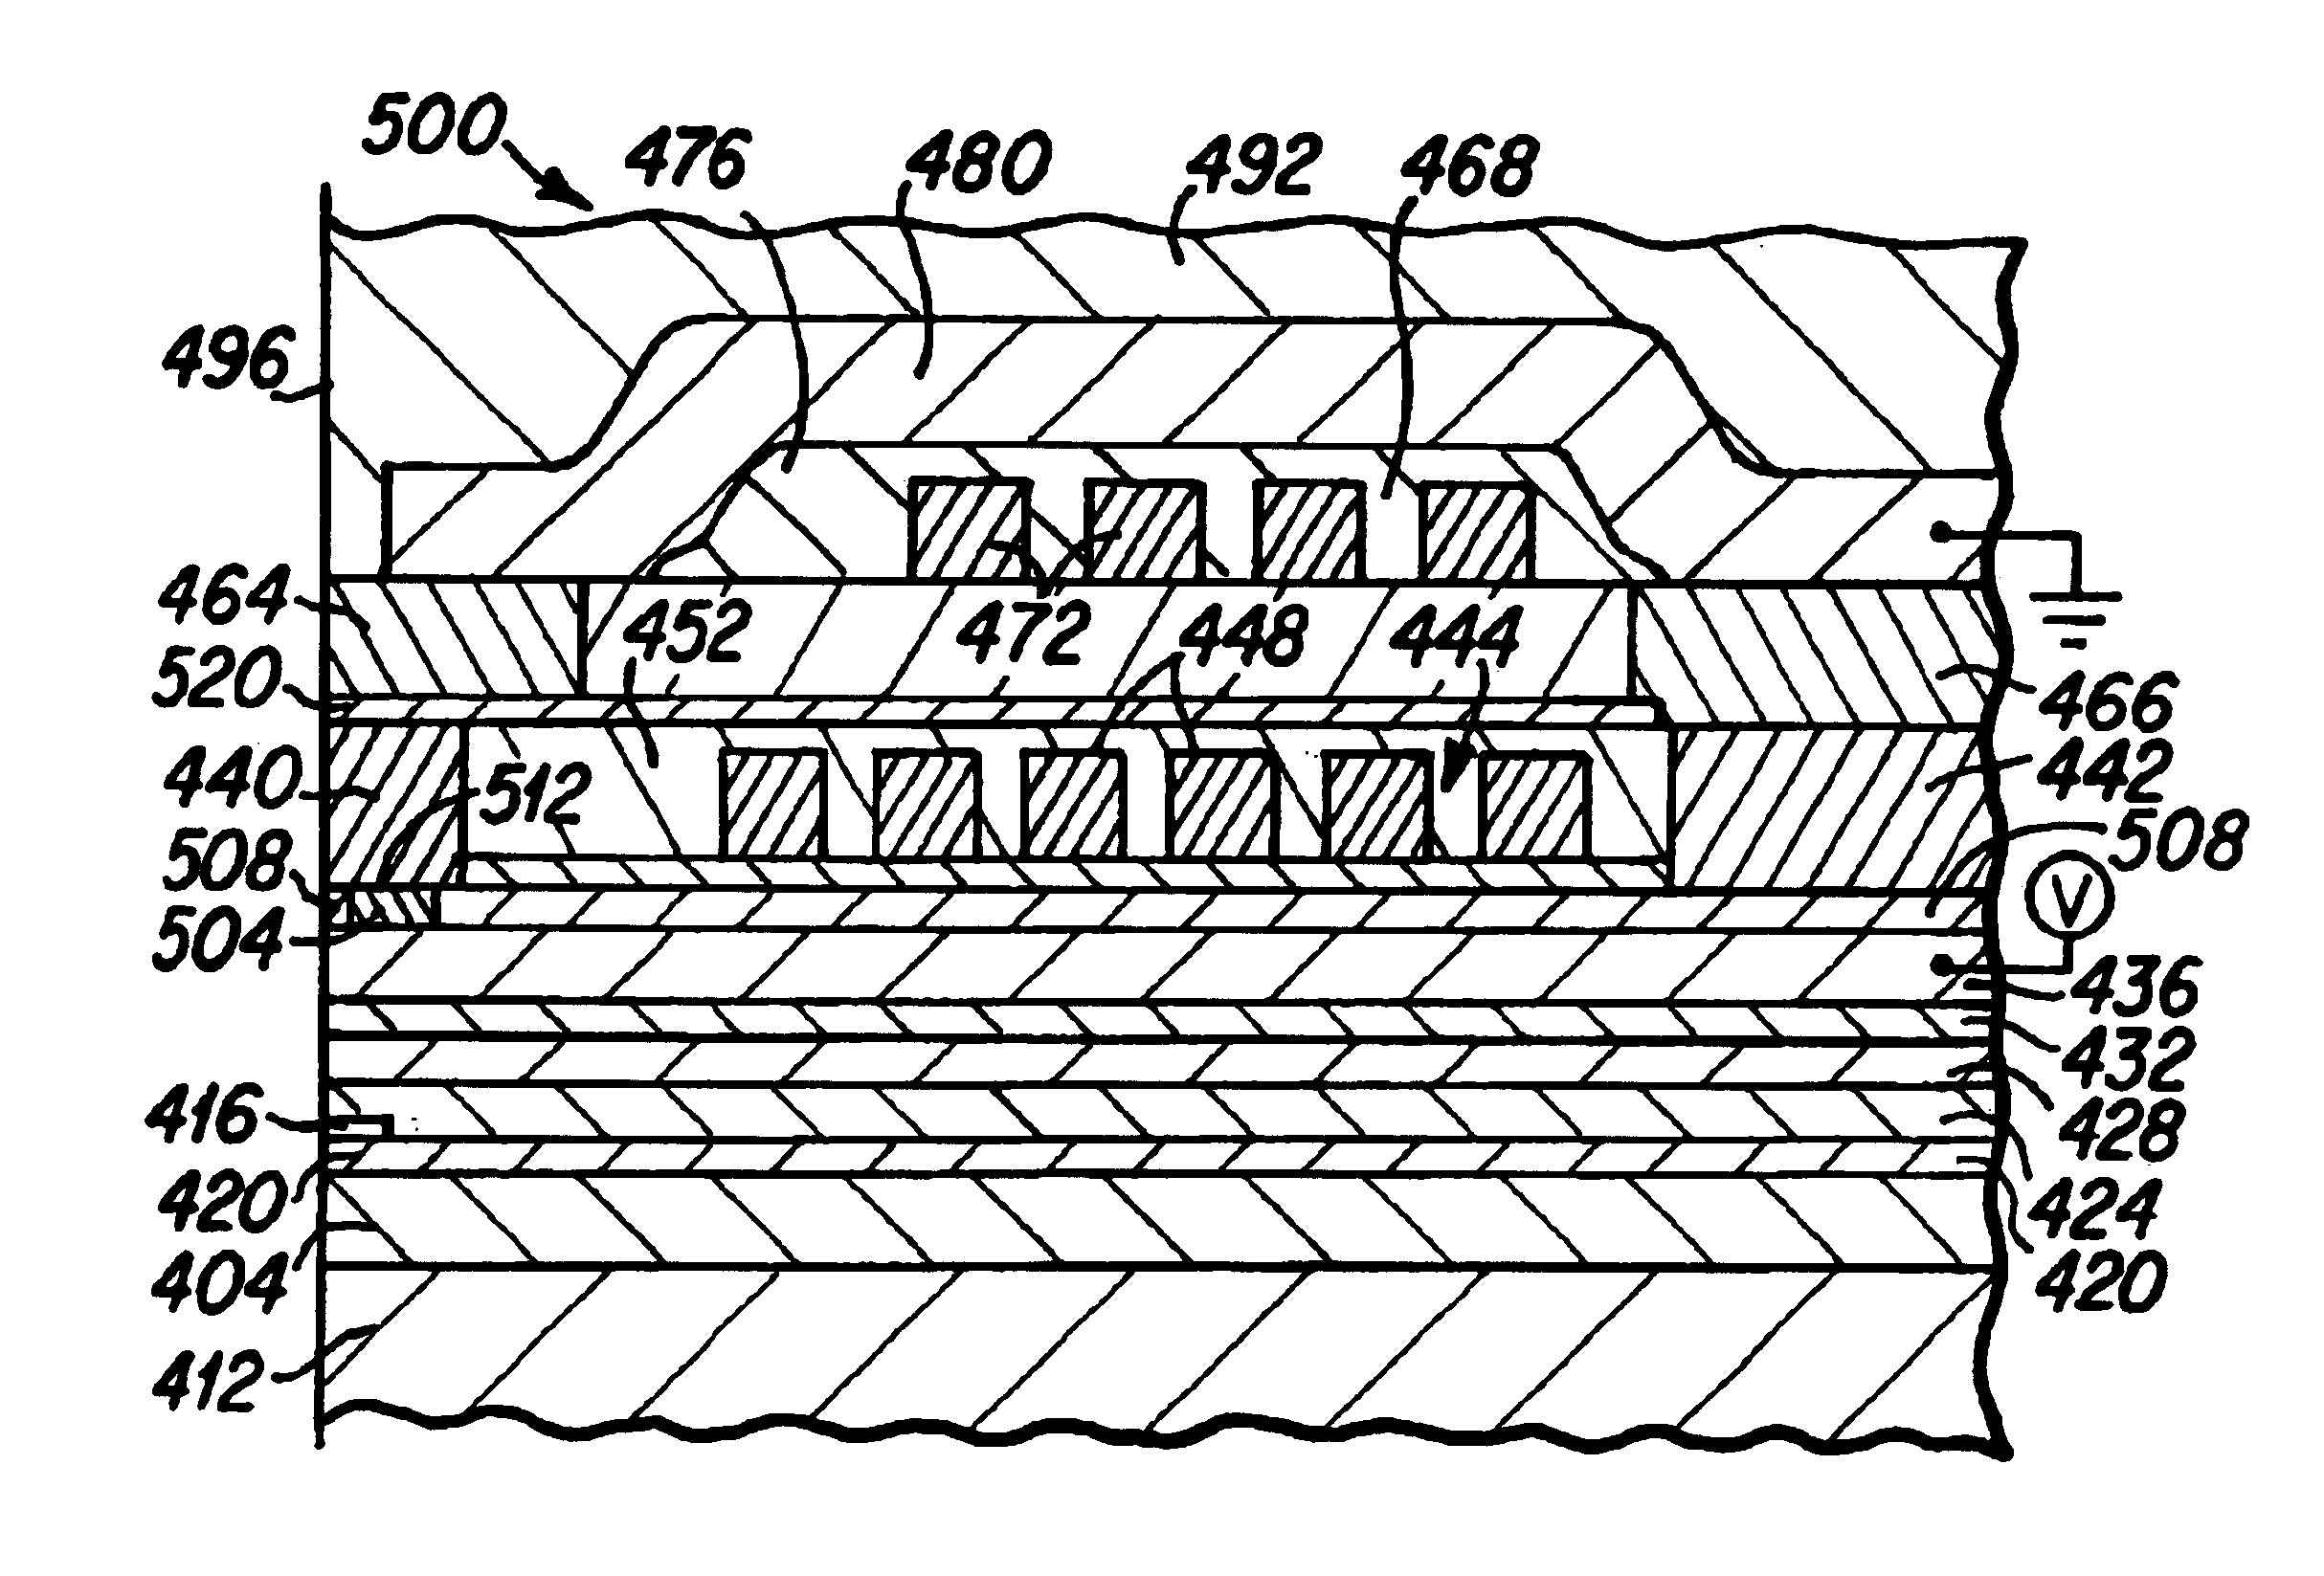 Magnetic head having media heating device that is electrically connected to magnetic pole piece